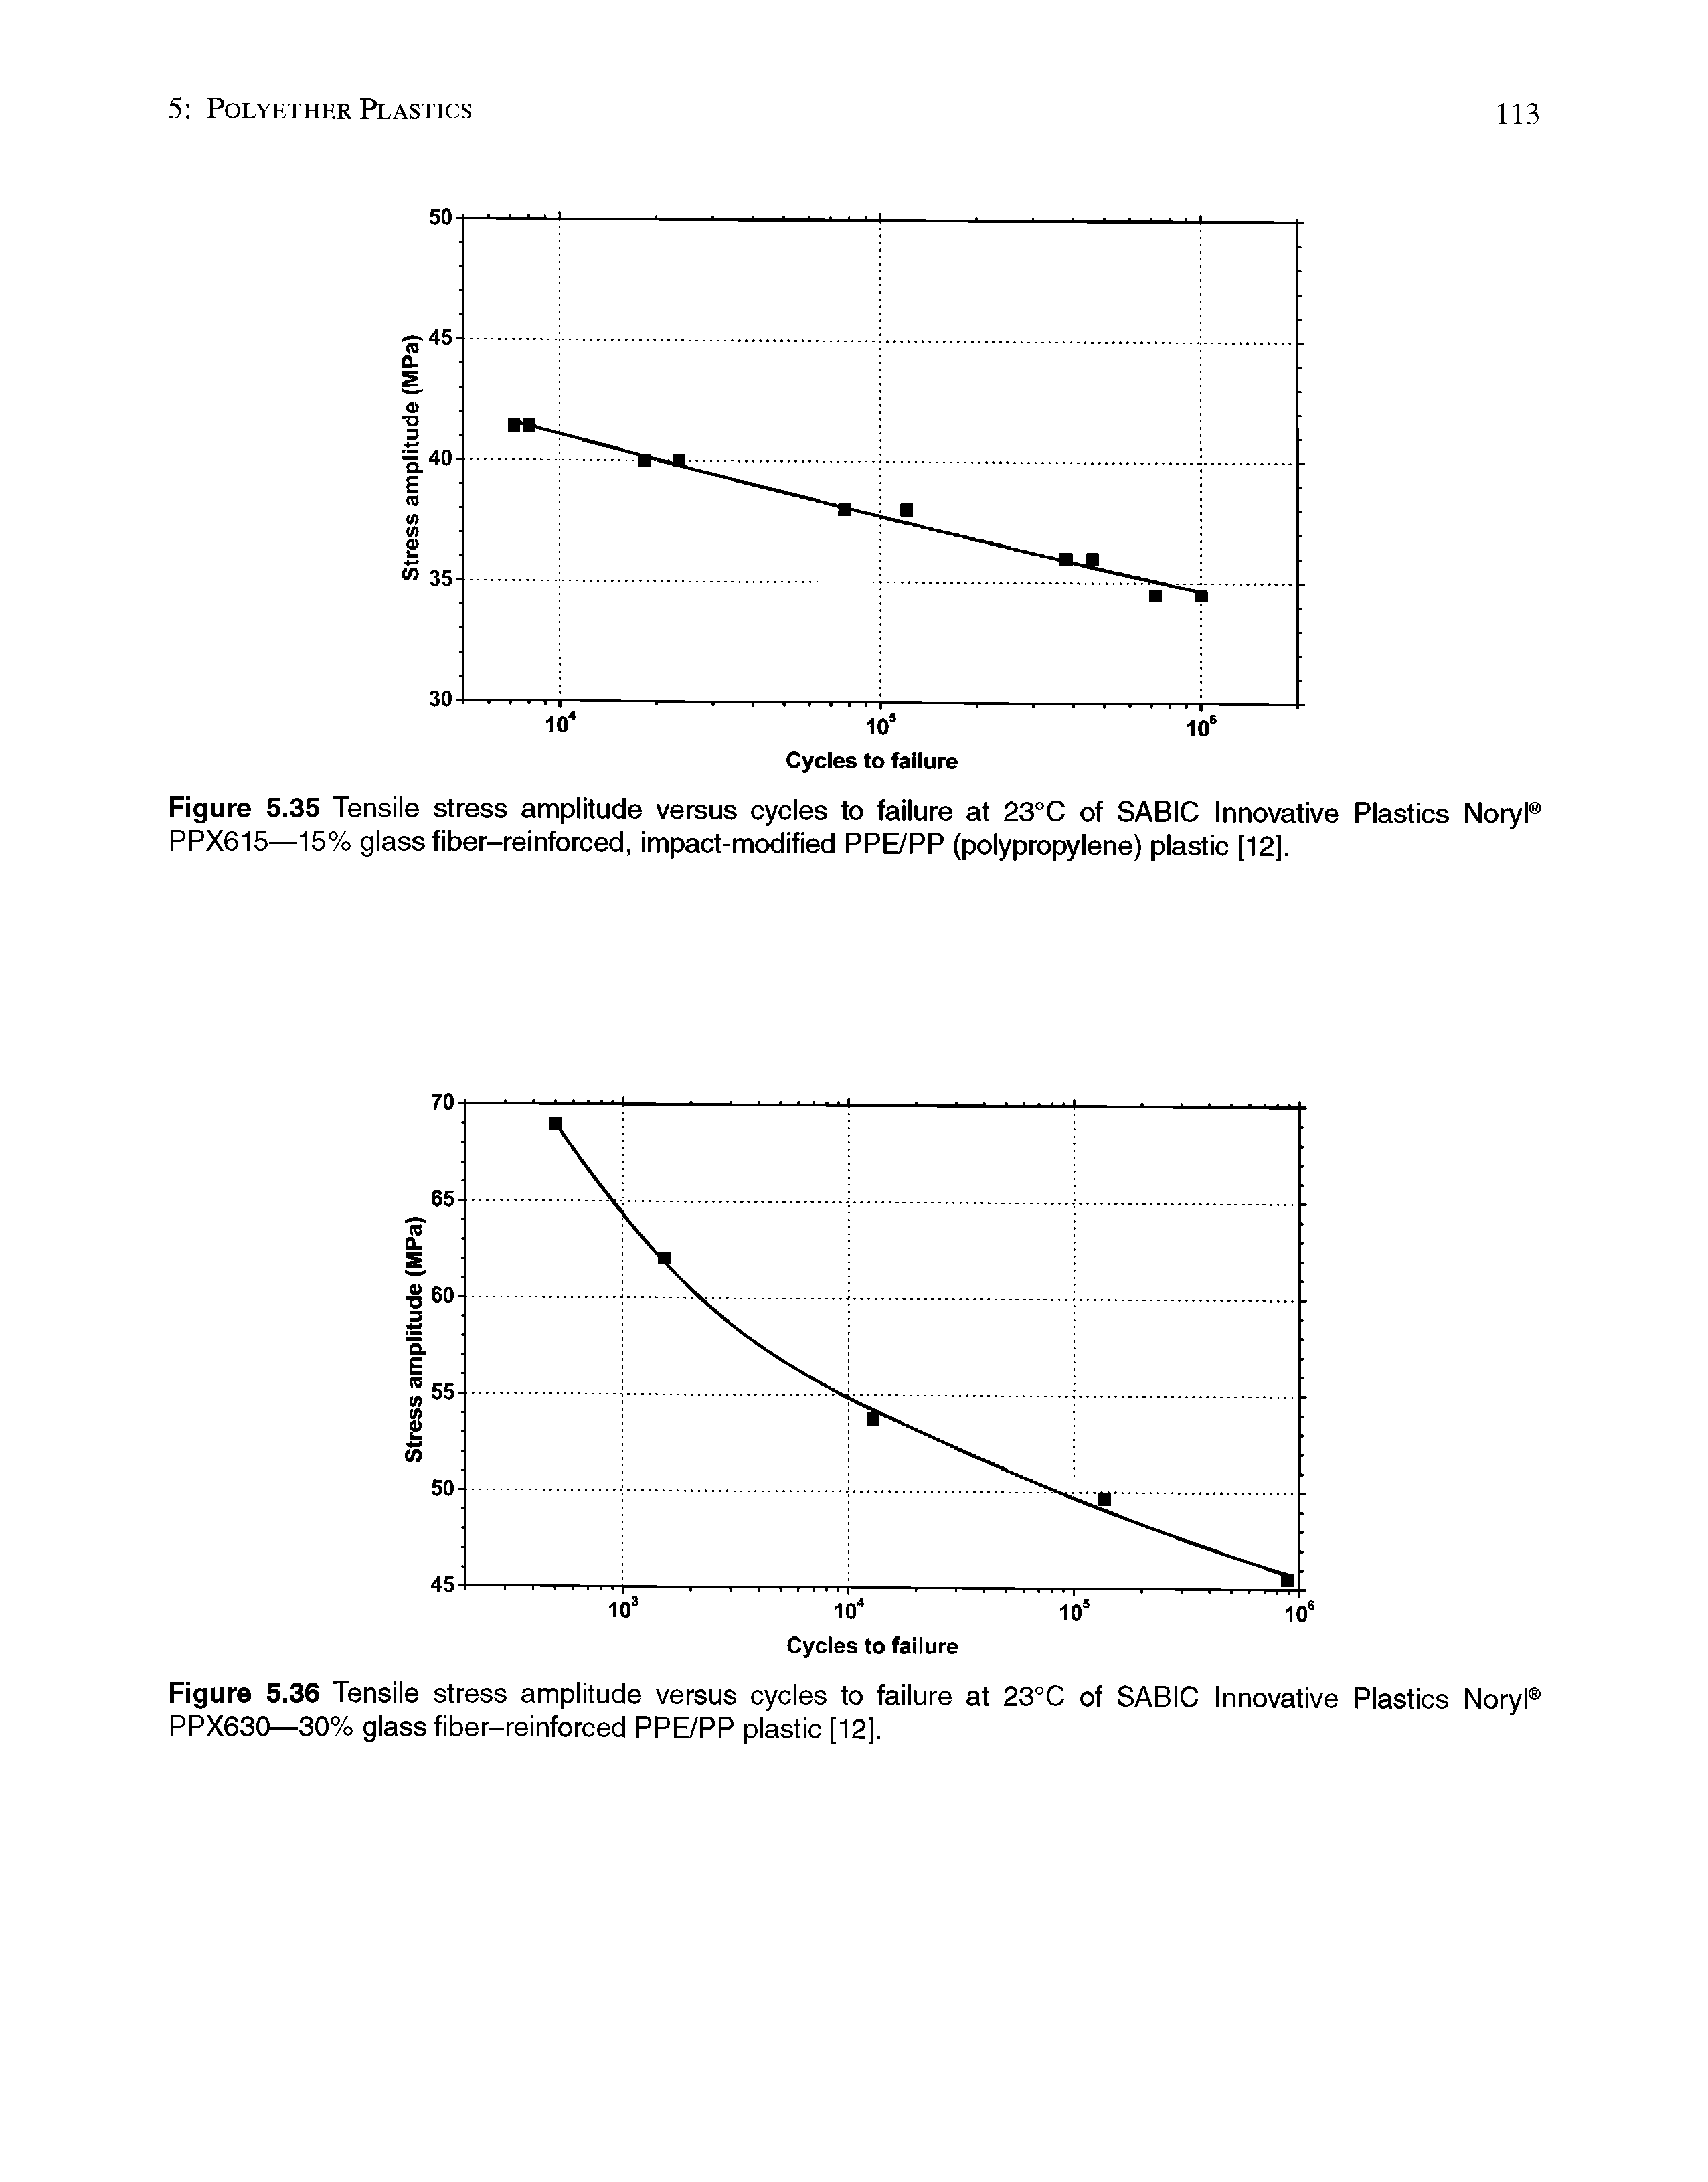 Figure 5.35 Tensile stress amplitude versus cycles to failure at 23°C of SABIC Innovative Plastics Noryl PPX615—15% glass fiber-reinforced, impact-modified PPE/PP (polypropylene) plastic [12].